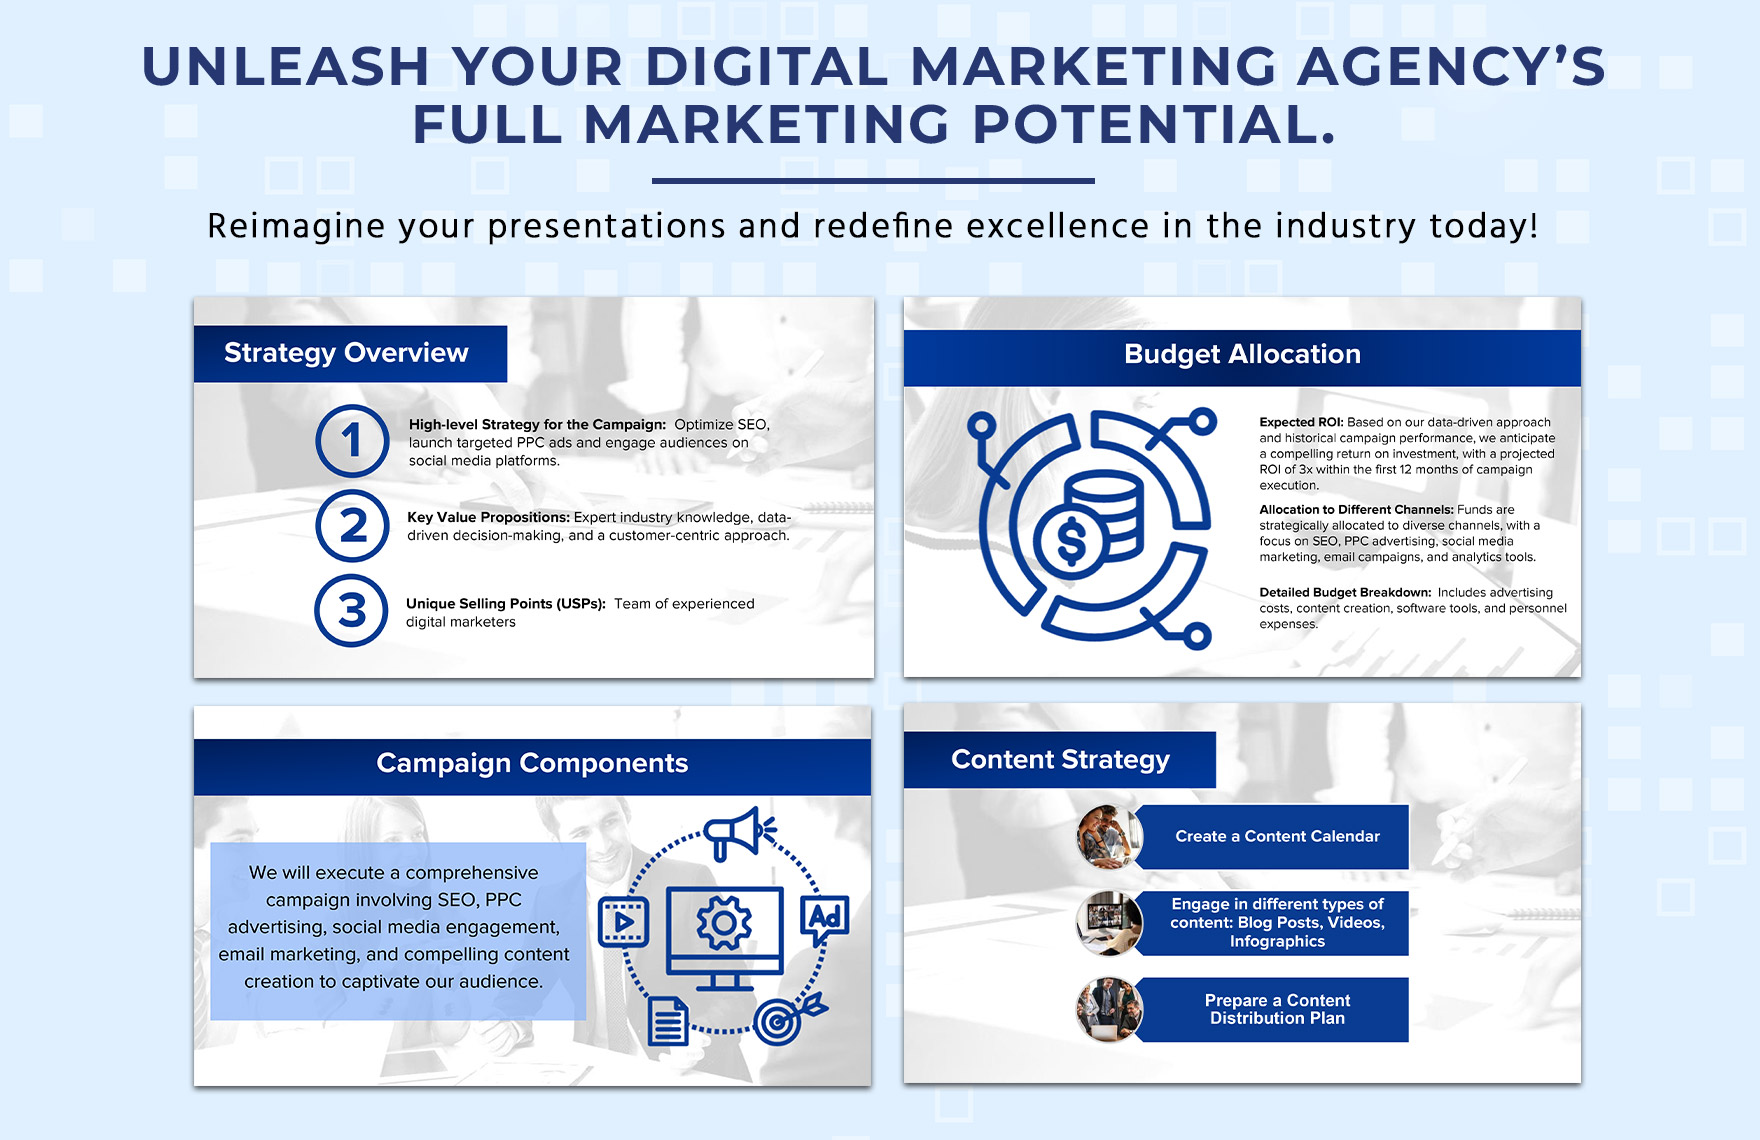 Digital Marketing Agency Marketing Campaign Overview Template